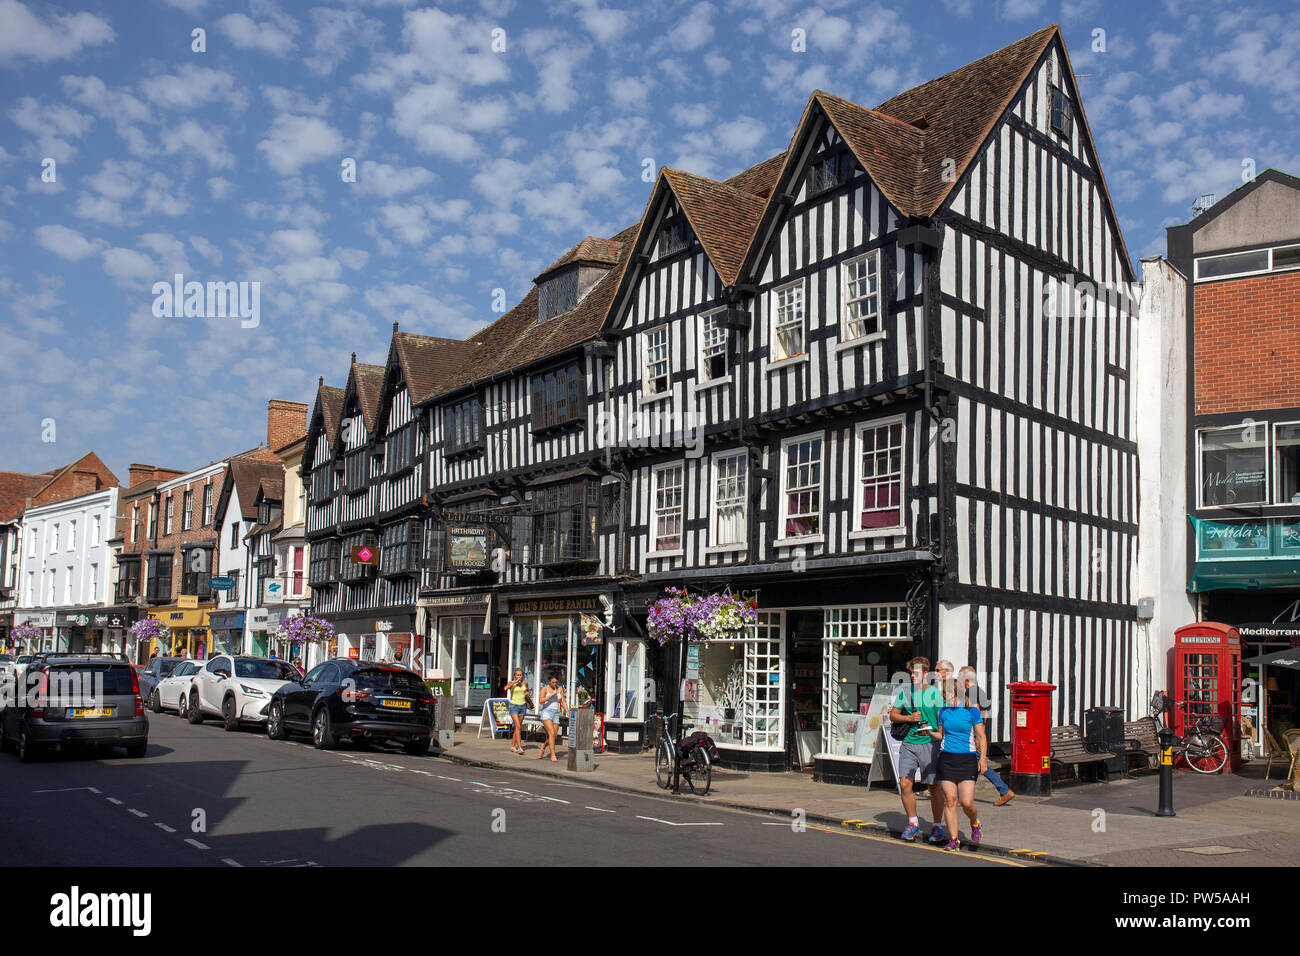 STRATFORD-UPON-AVON, ENGLAND - August 6, 2018: Tudor style buiildings in the High Street at Stratford, Shakespeare's home town. Stock Photo